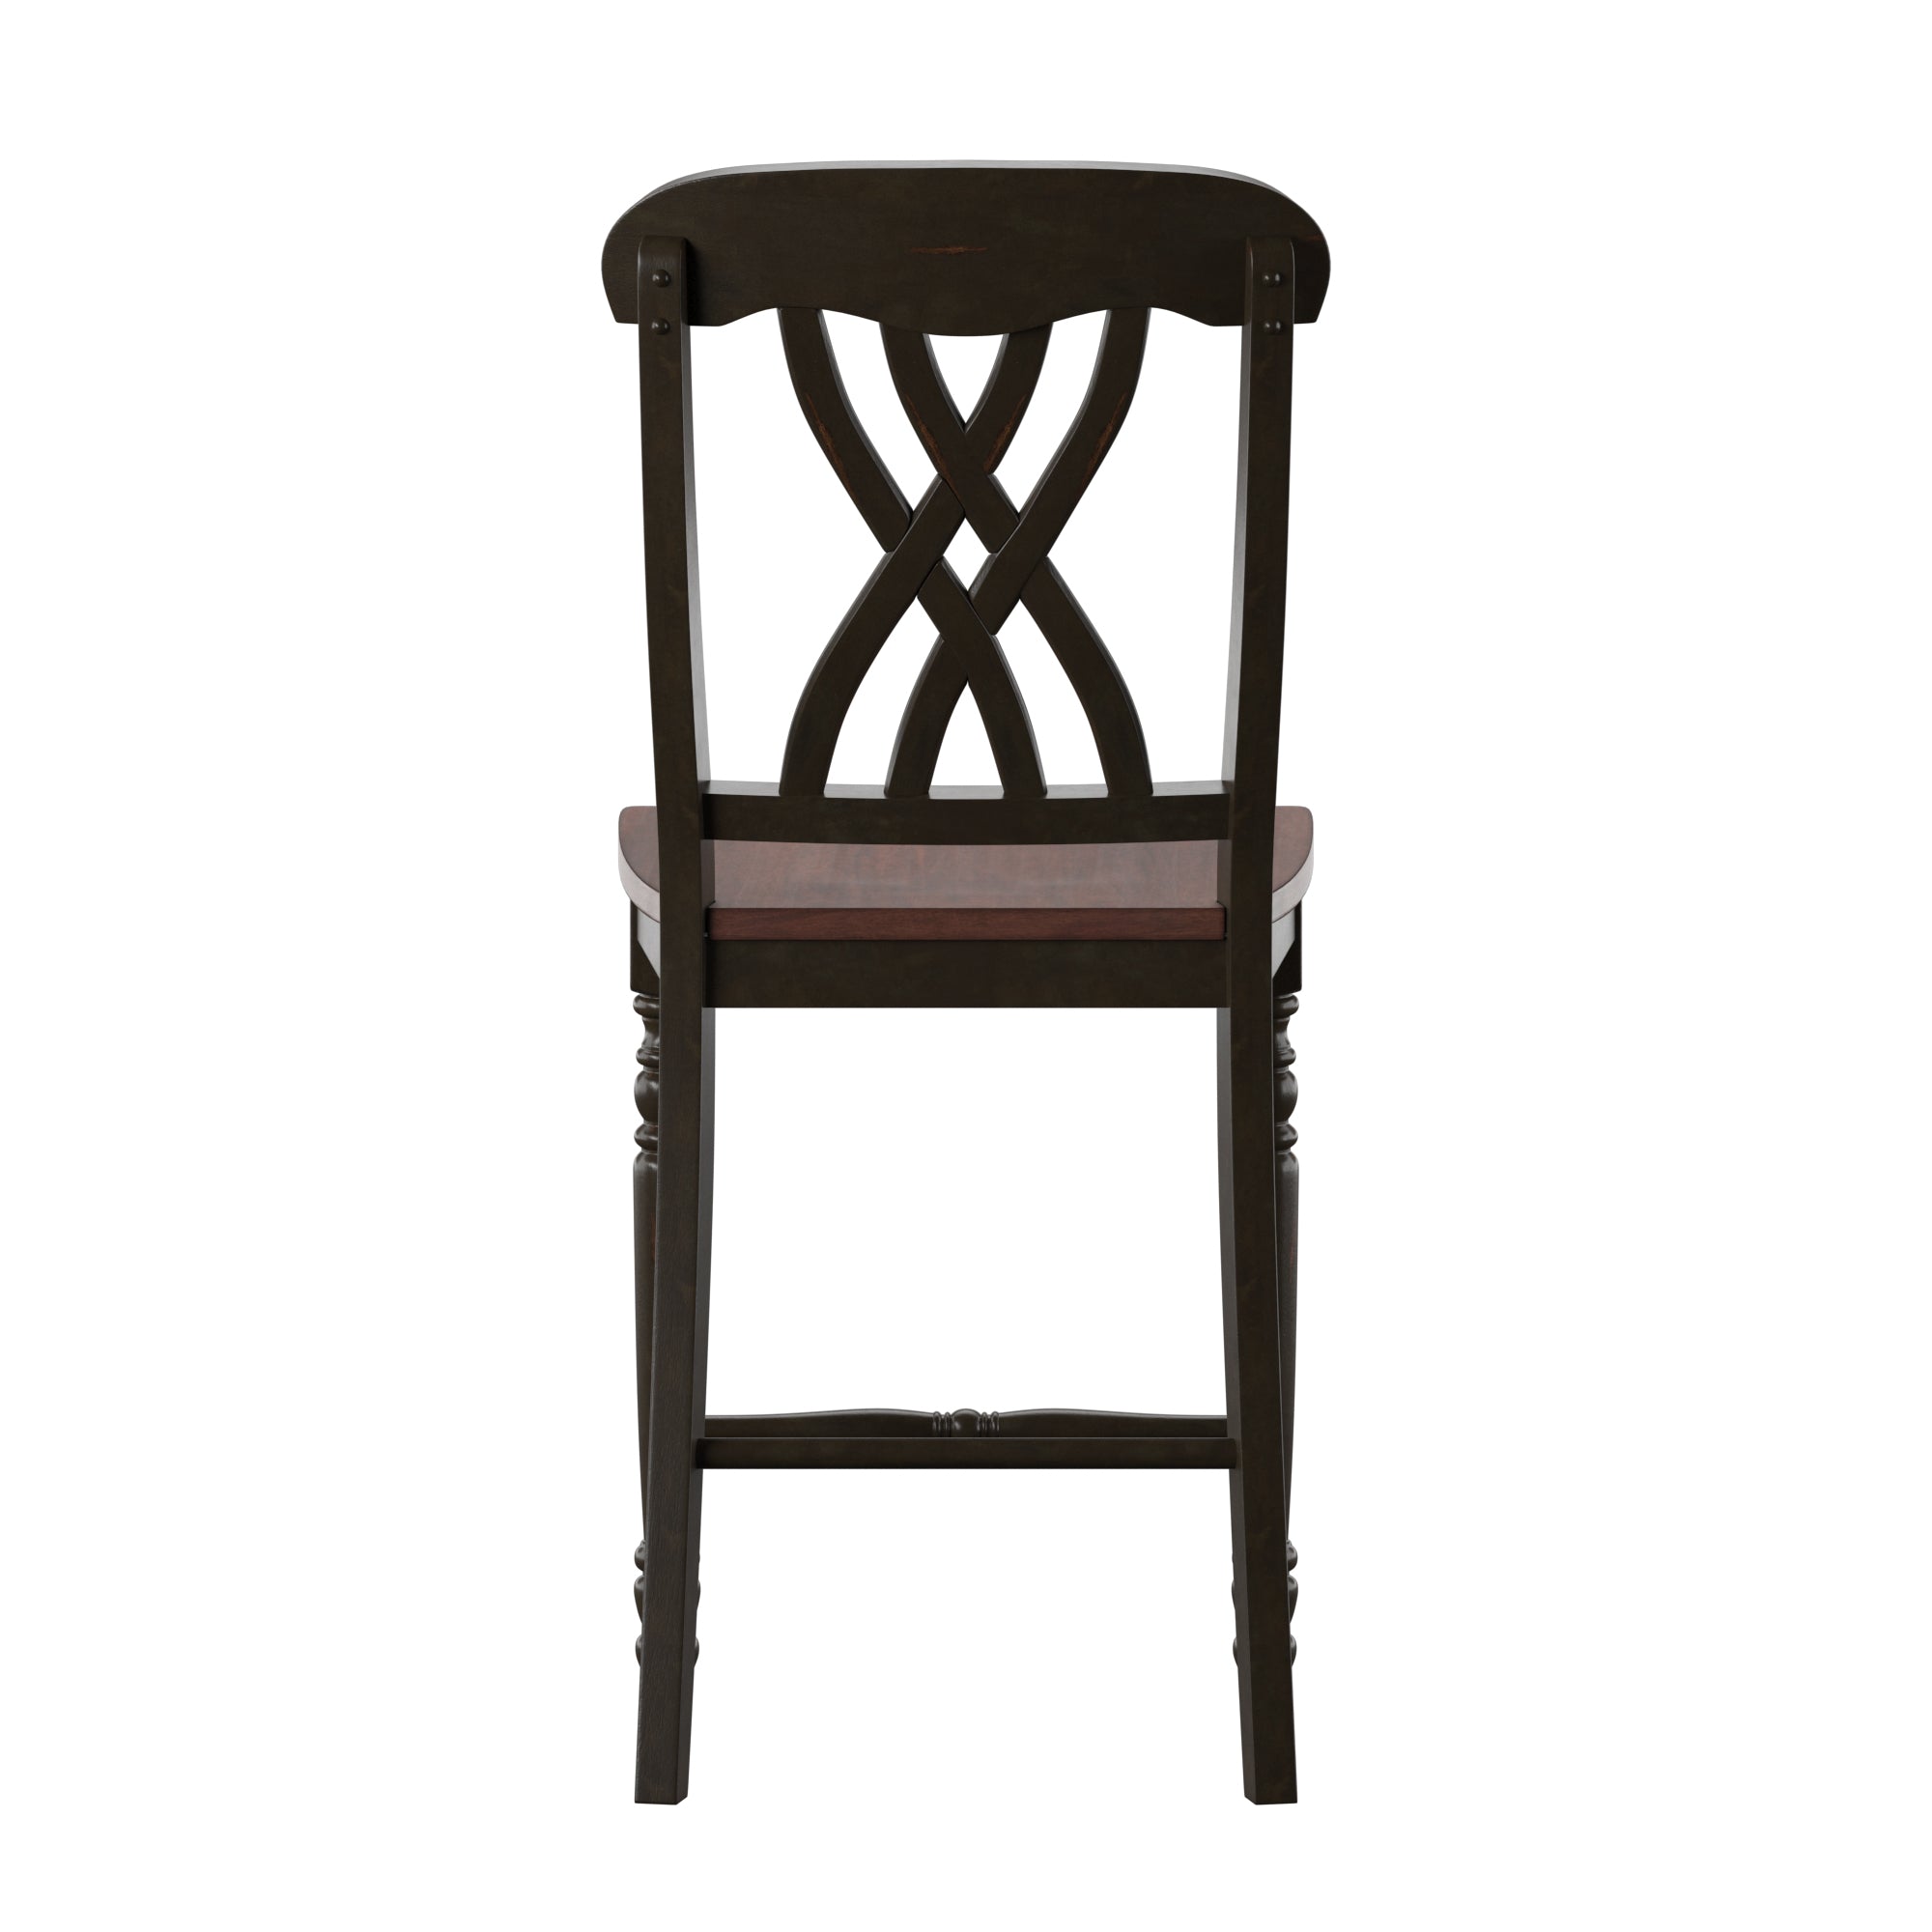 Antique Two-Tone Counter Height Chairs (Set of 2) - Antique Black, Scroll Back